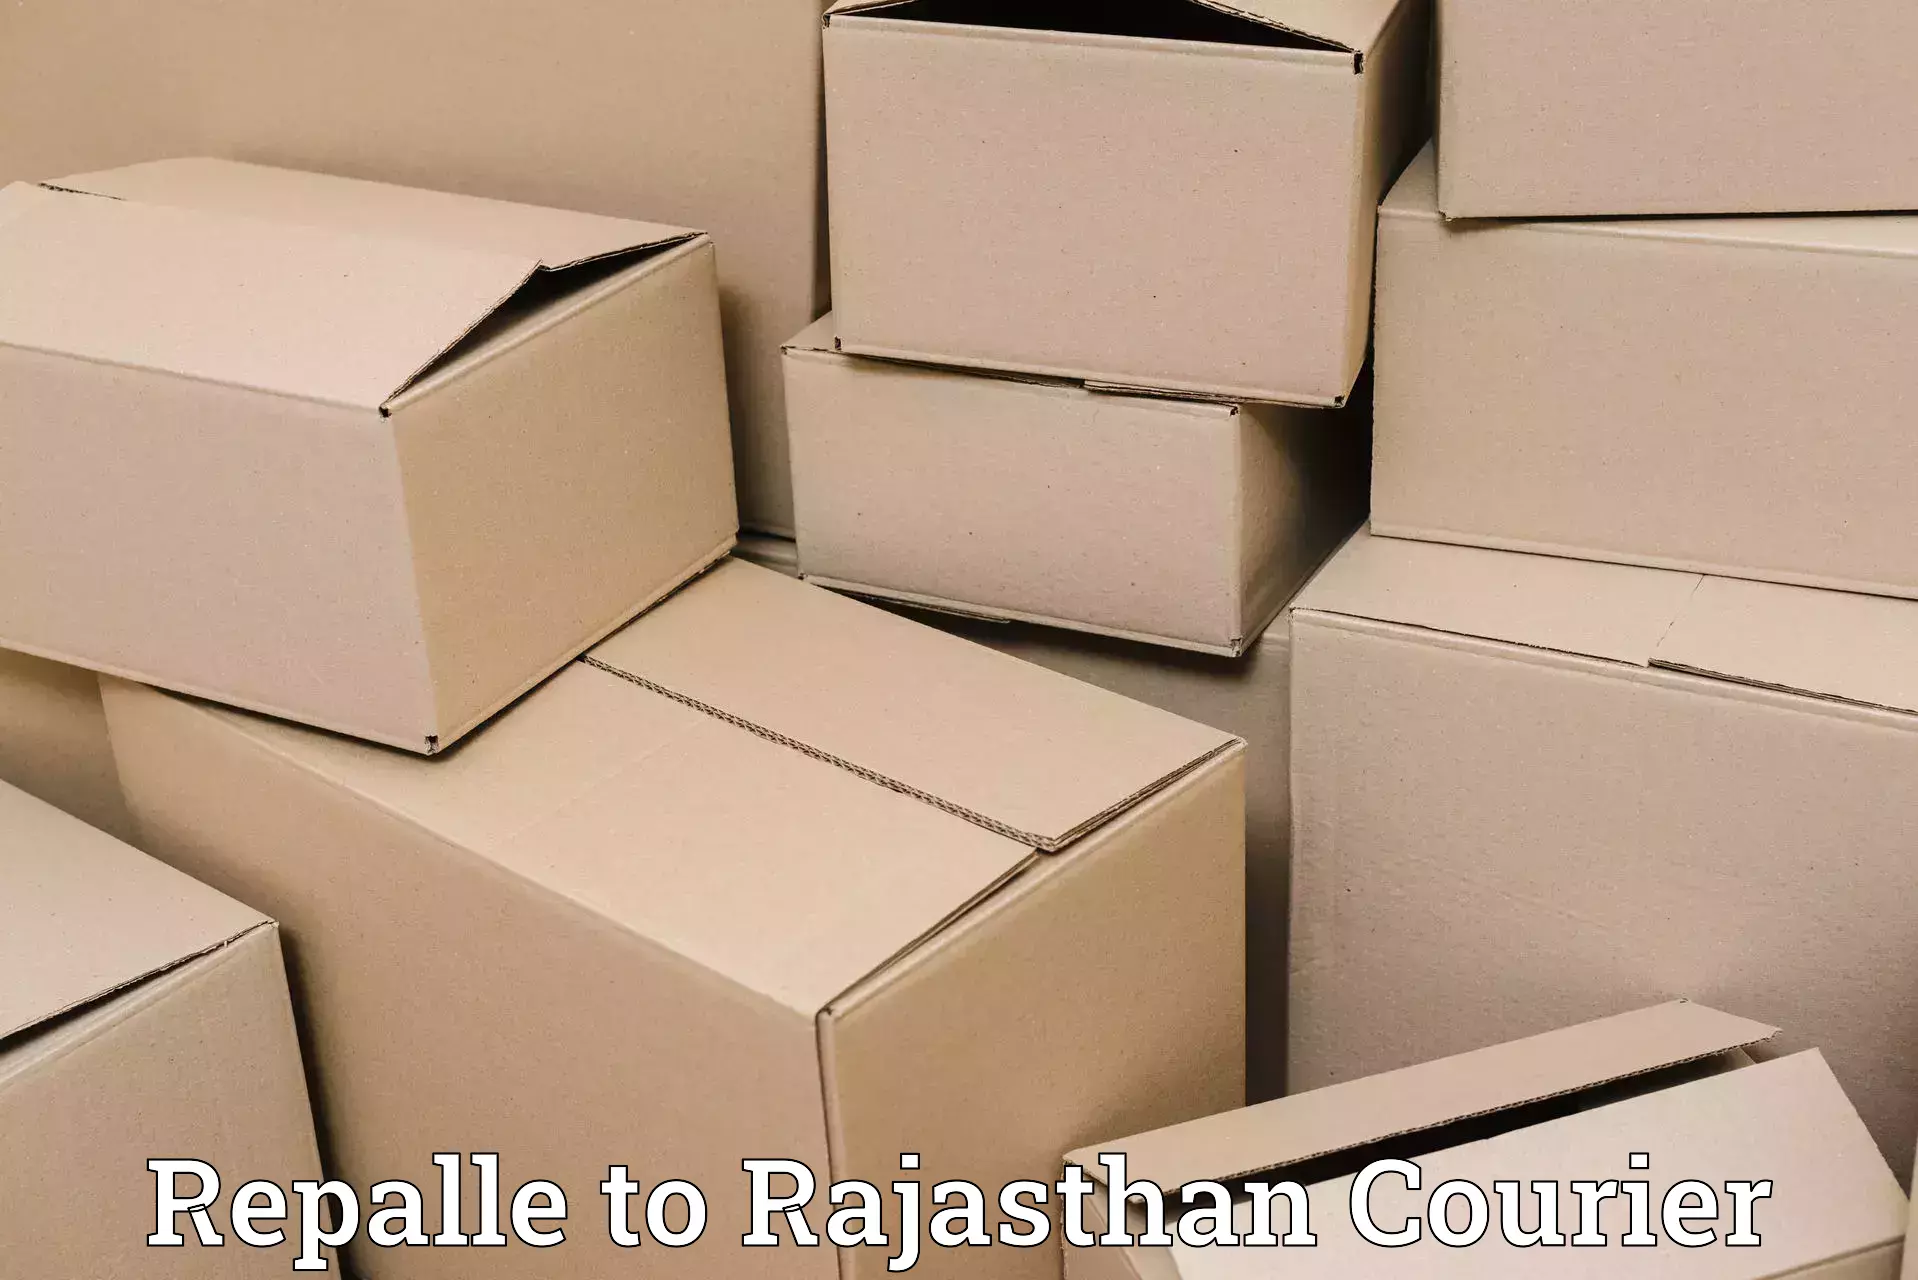 Urgent luggage shipment in Repalle to Rajasthan